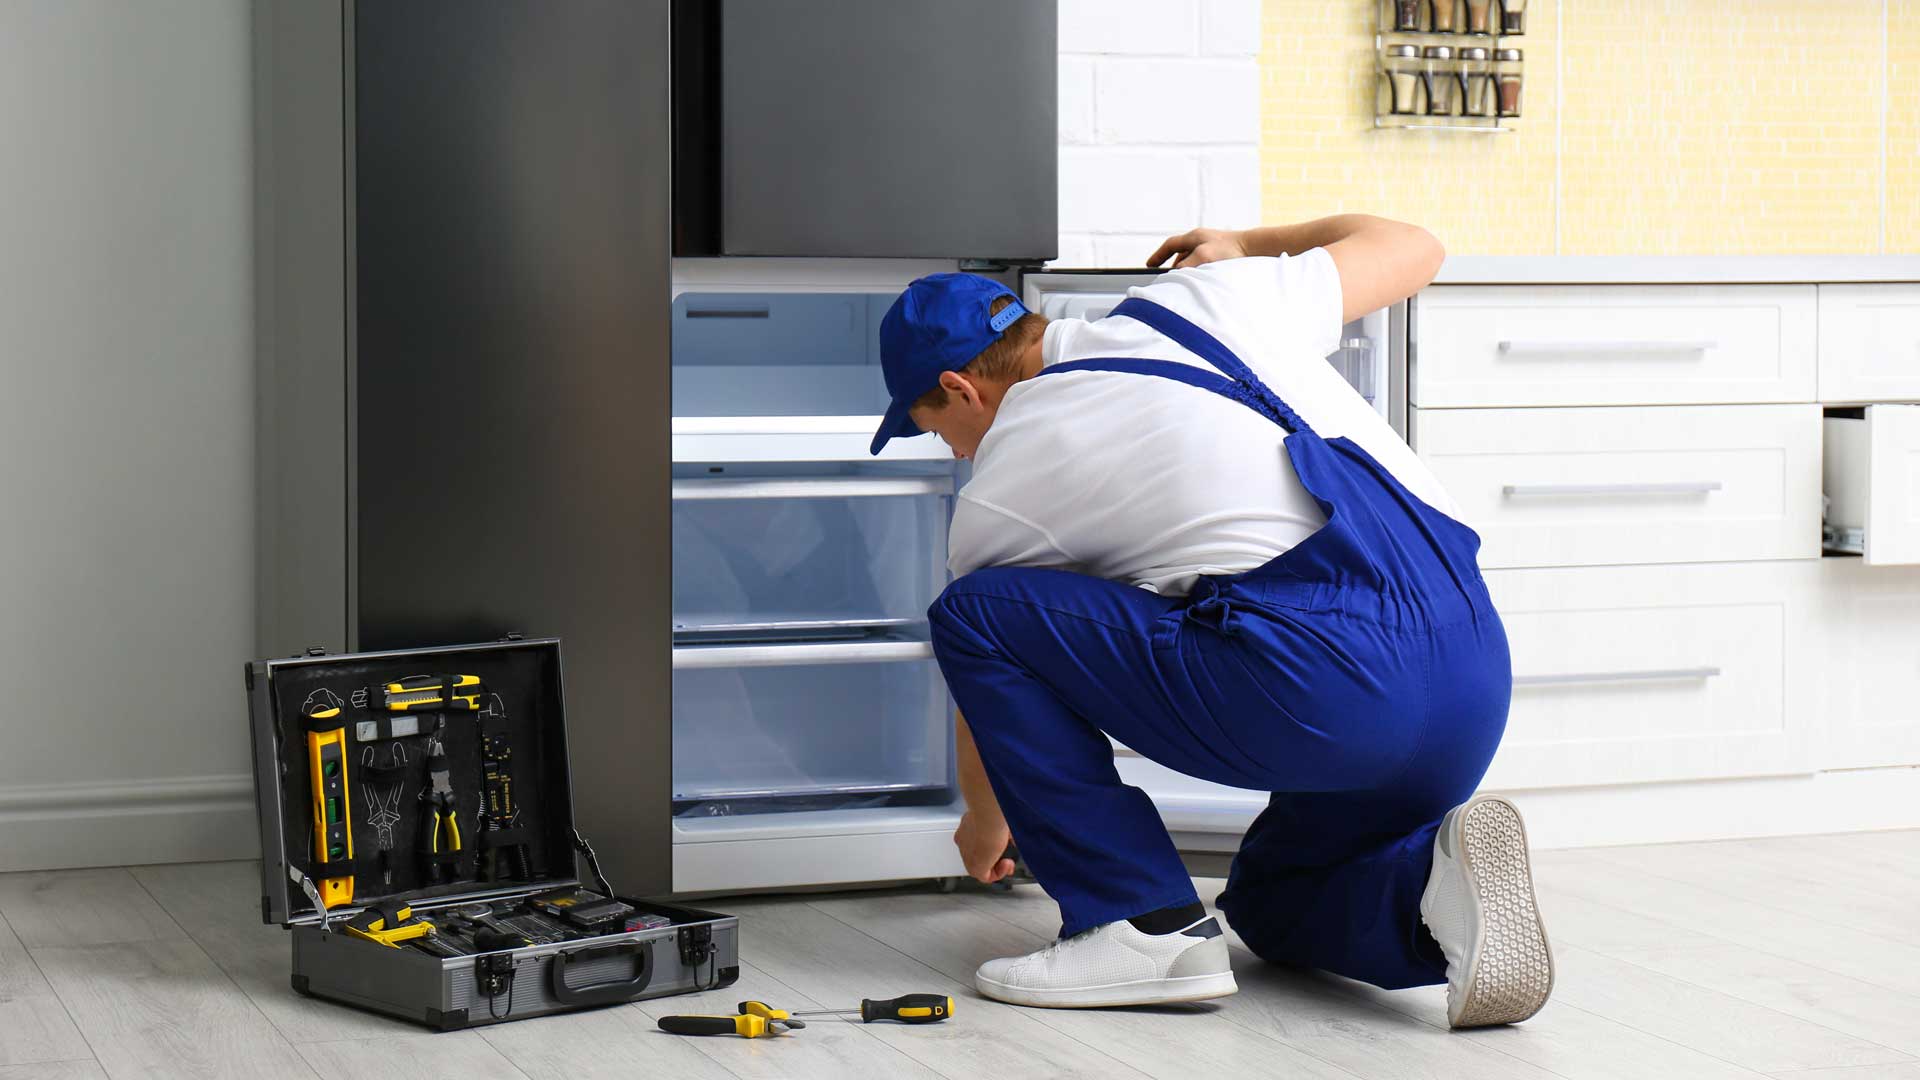 A man in blue overalls repairing the freezer drawer of a refrigerator